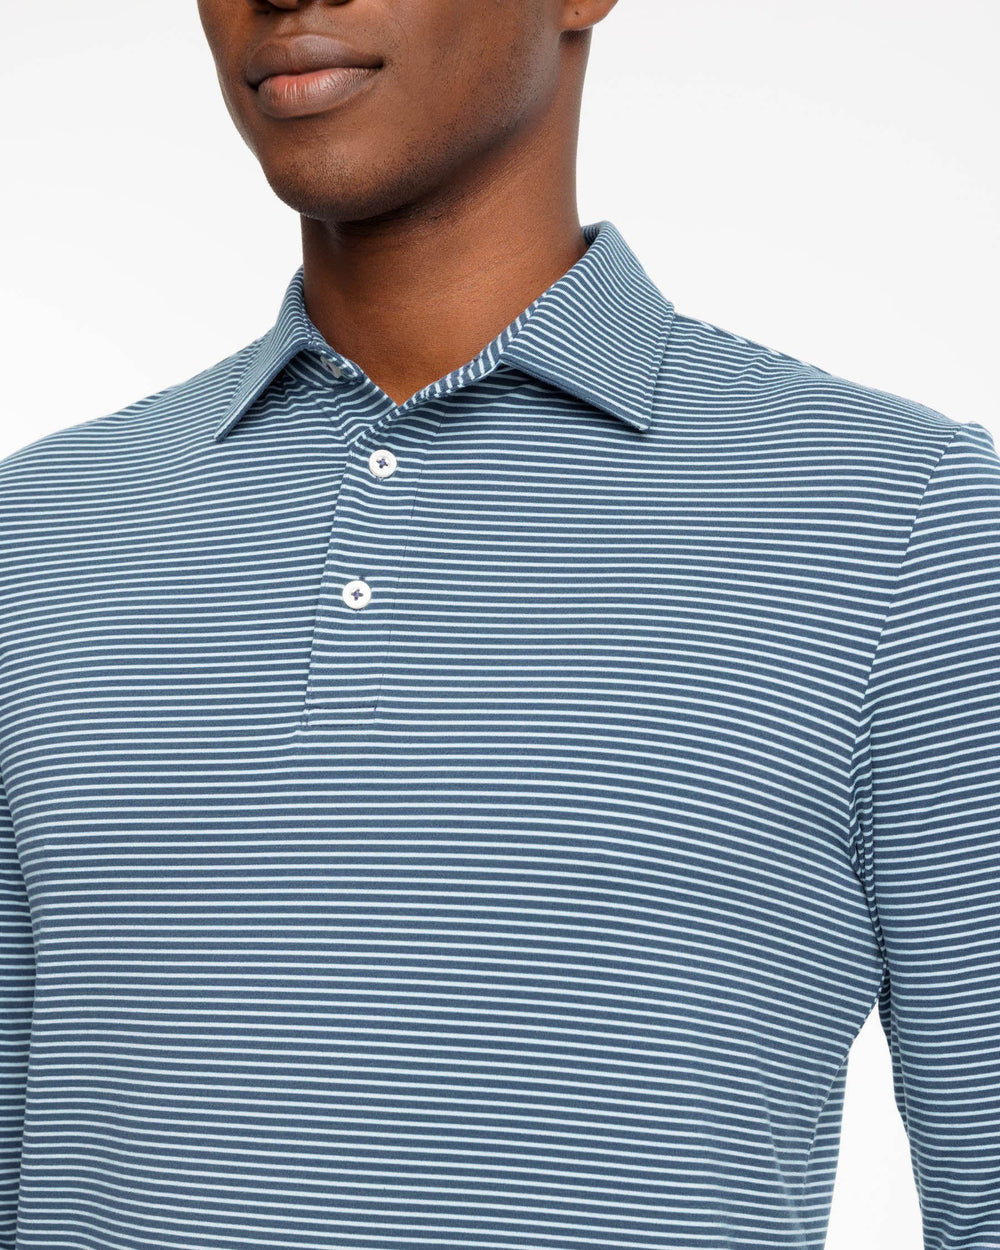 The detail view of the Ryder Heather Montefuma Performance Long Sleeve Polo Shirt by Southern Tide - Heather Insignia Blue